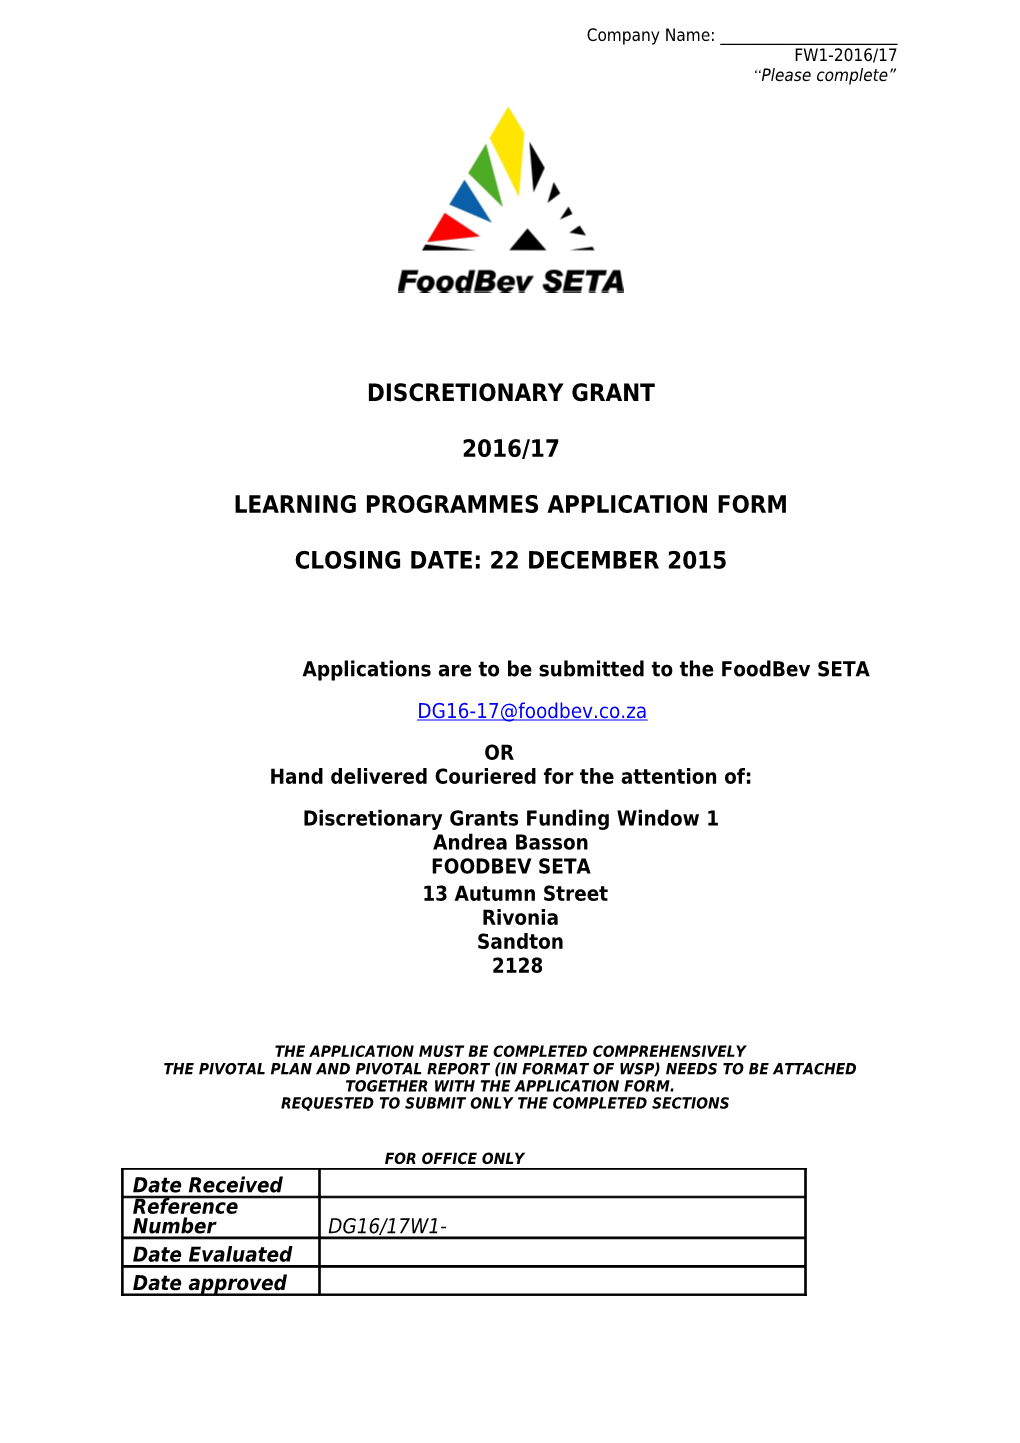 Applications Are to Be Submitted to the Foodbev SETA